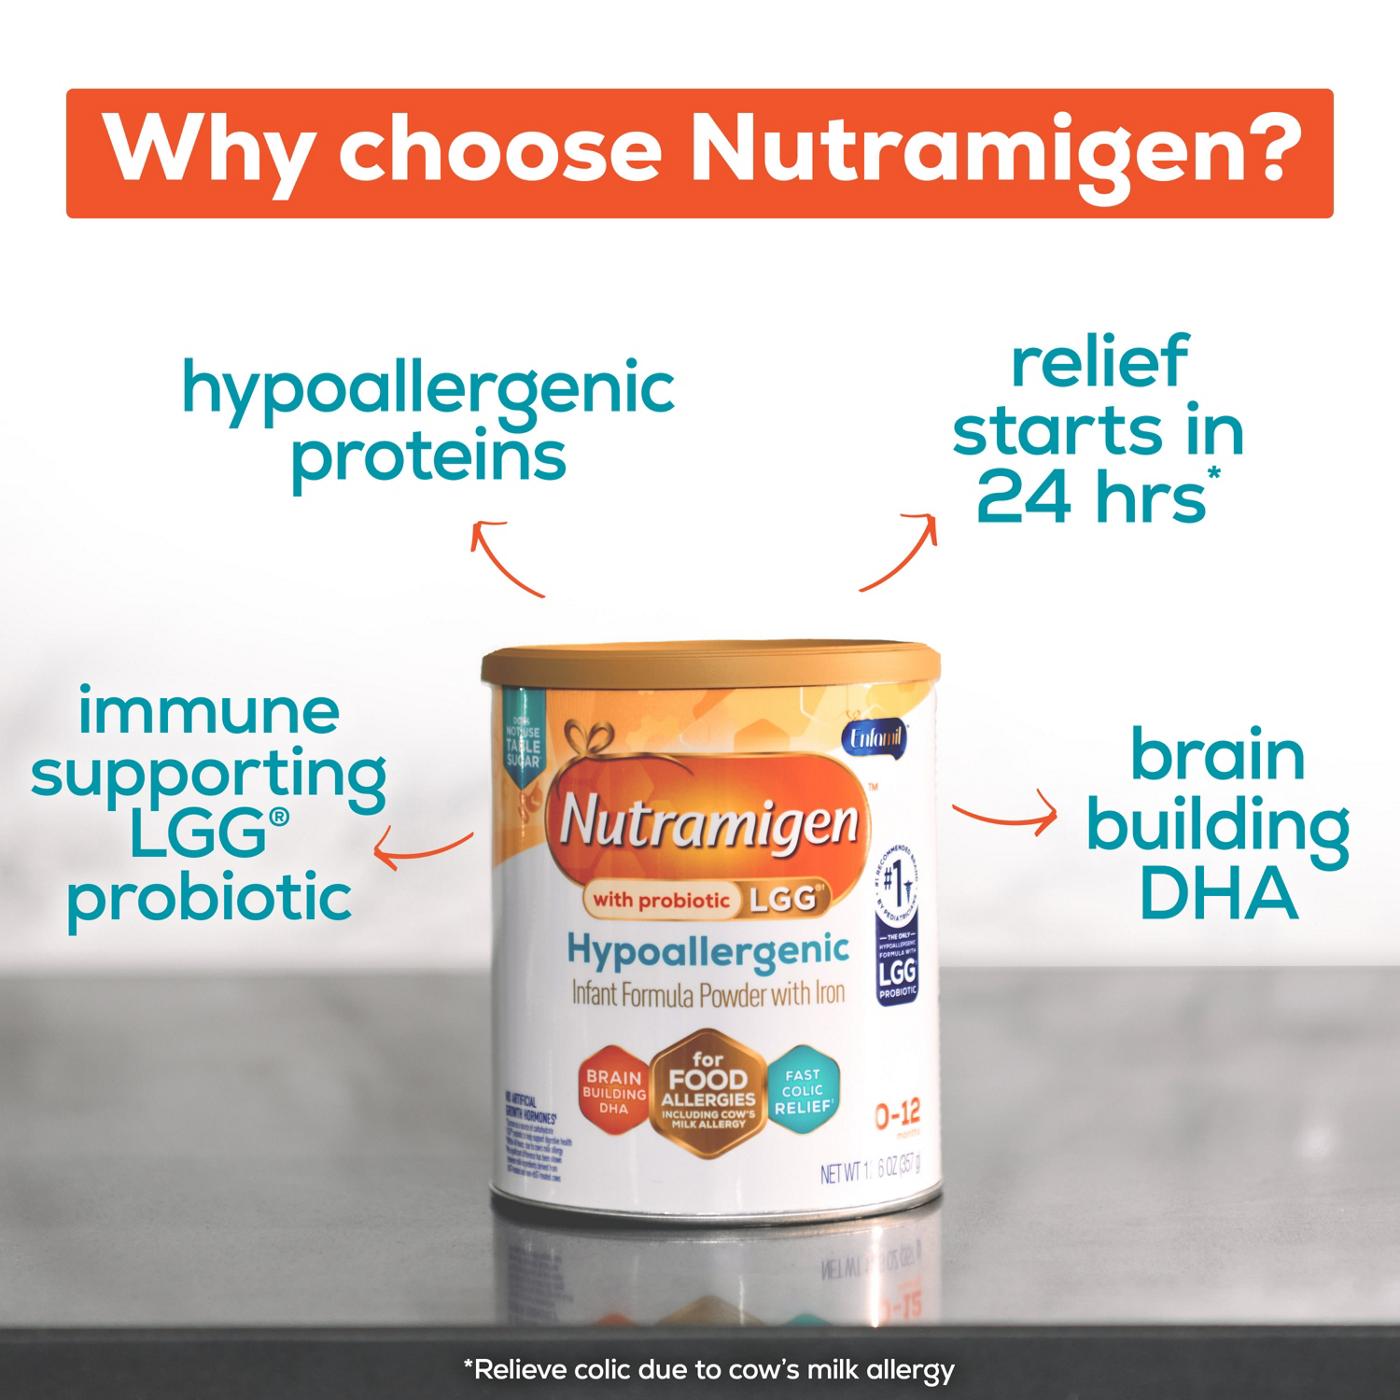 Nutramigen Hypoallergenic Powder Infant Formula with Iron; image 8 of 9